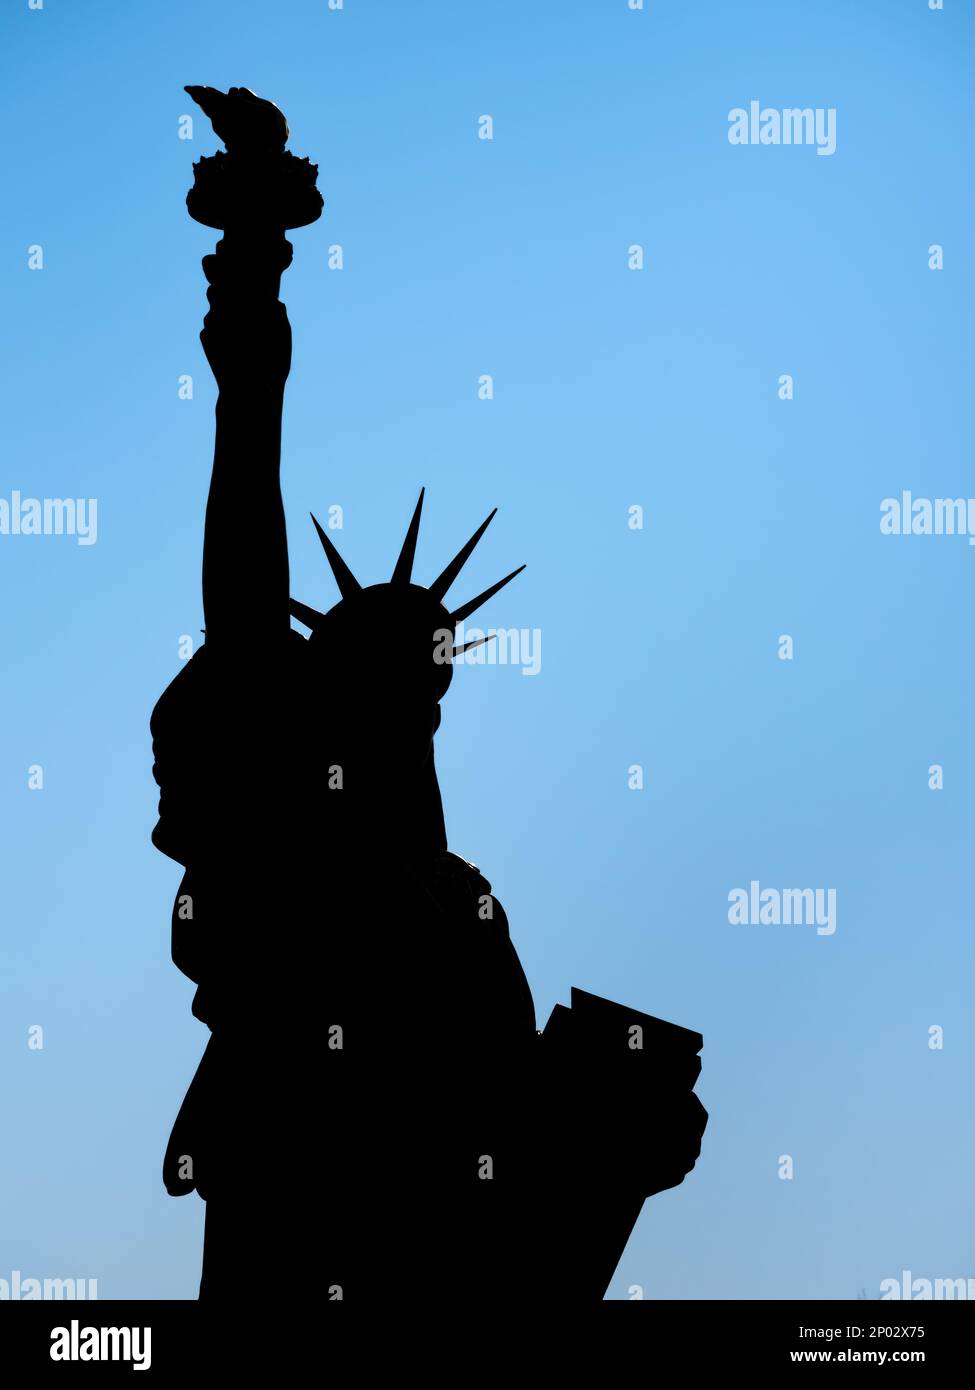 Colmar, France - March 29, 2022: Silhouette of the Statue of Liberty, designed by Frederic Auguste Bartholdi. Stock Photo